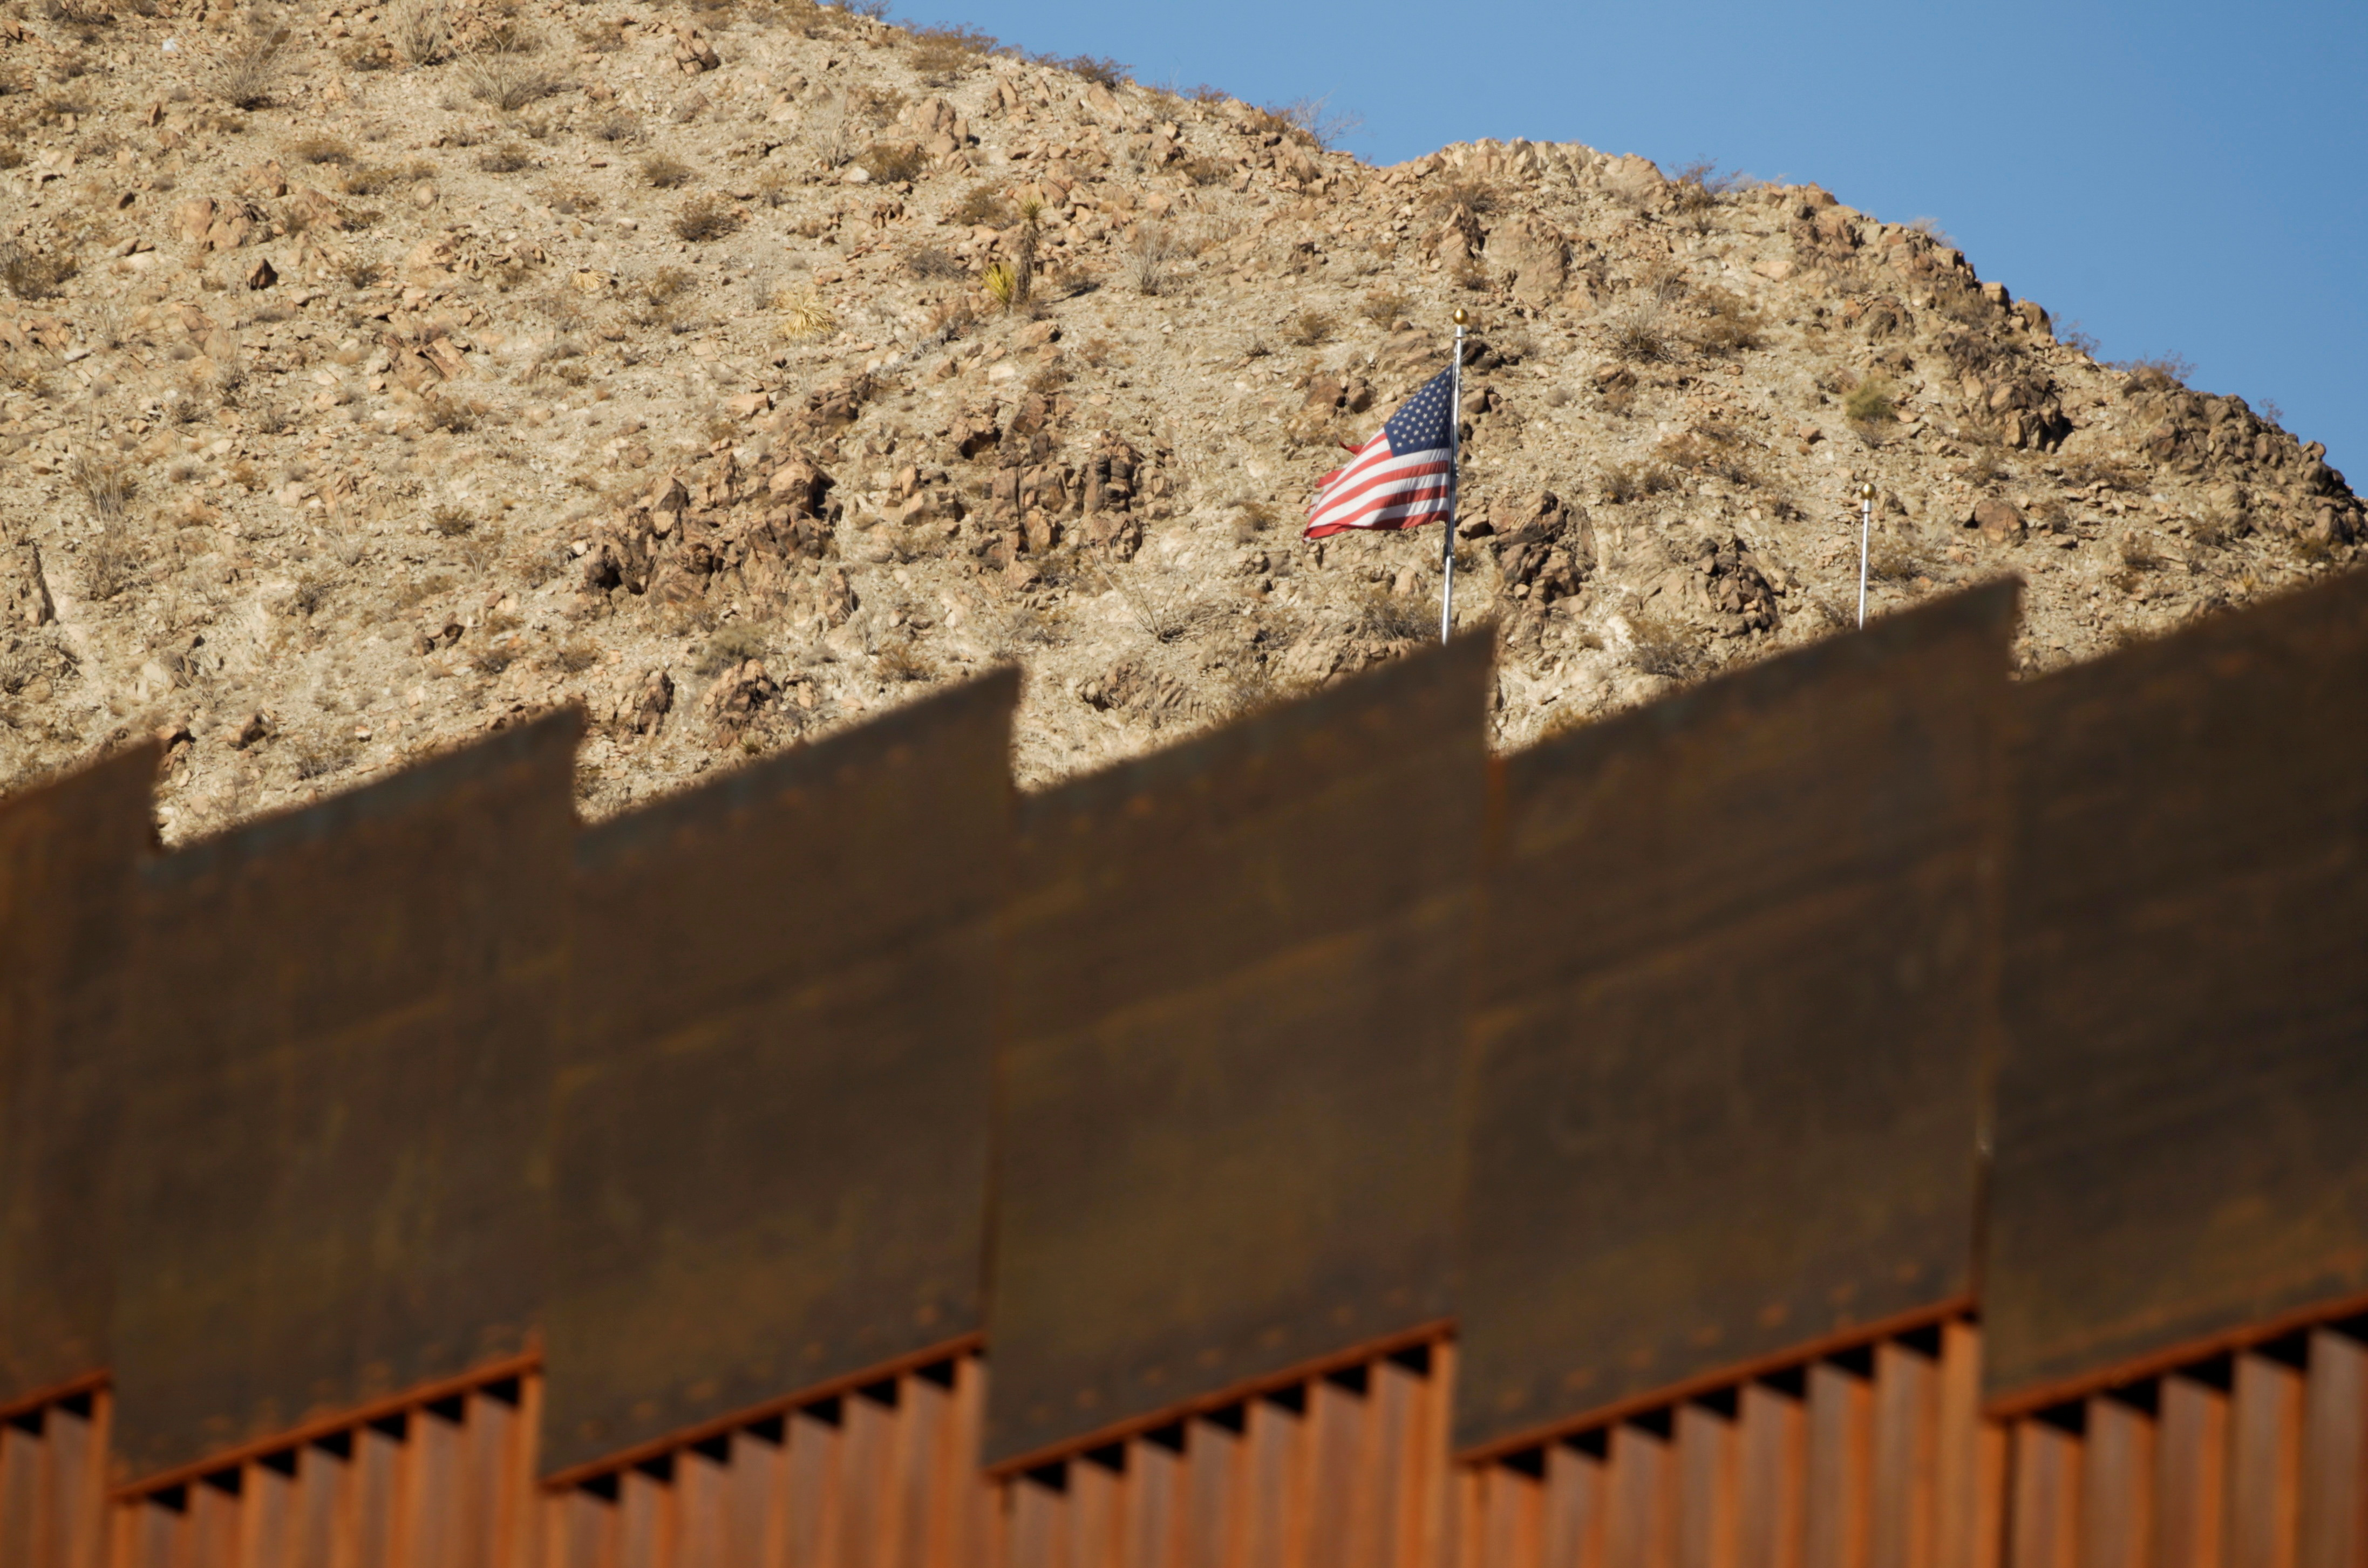 The U.S. flag is seen near a section of the border fence between Mexico and United States, as pictured from Ciudad Juarez